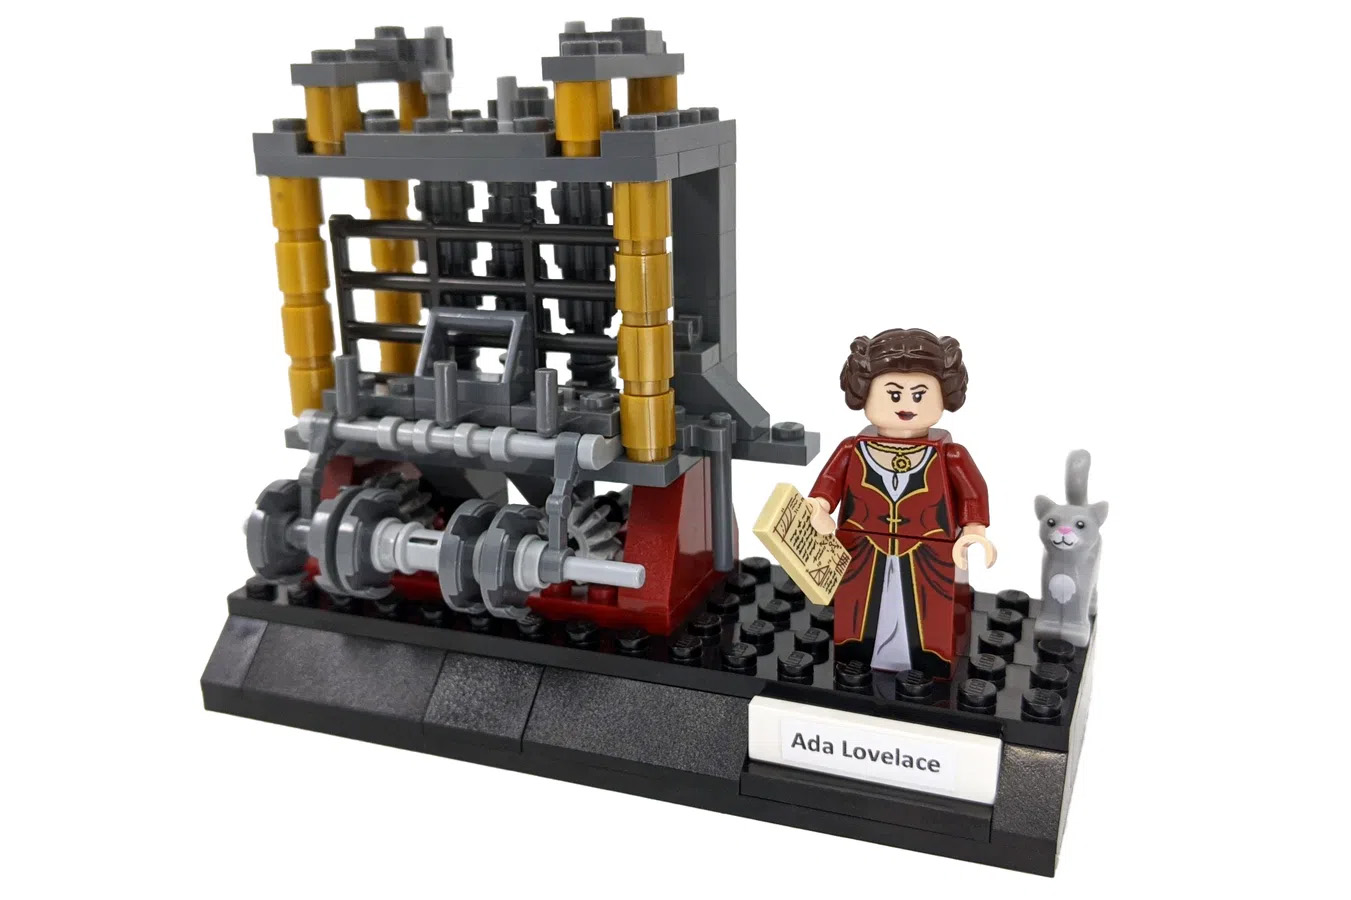 WOMEN OF COMPUTING Achieves 10K Support on LEGO IDEAS